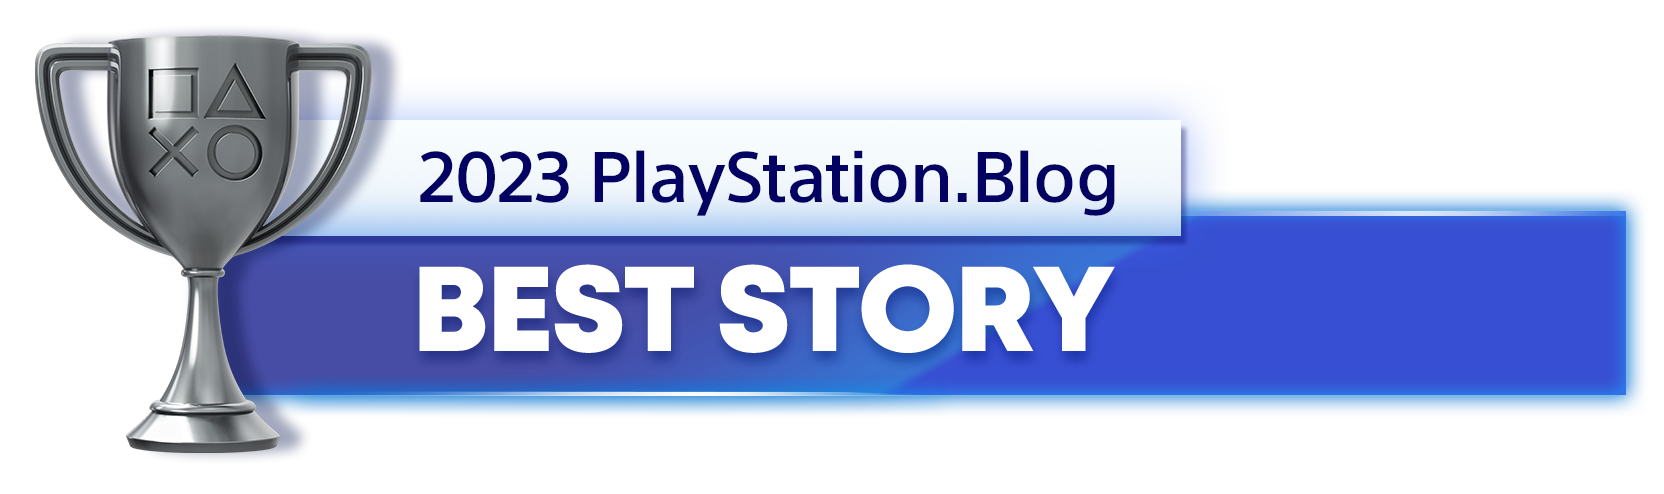  Silver Trophy for the 2023 PlayStation Blog Best Story Winner